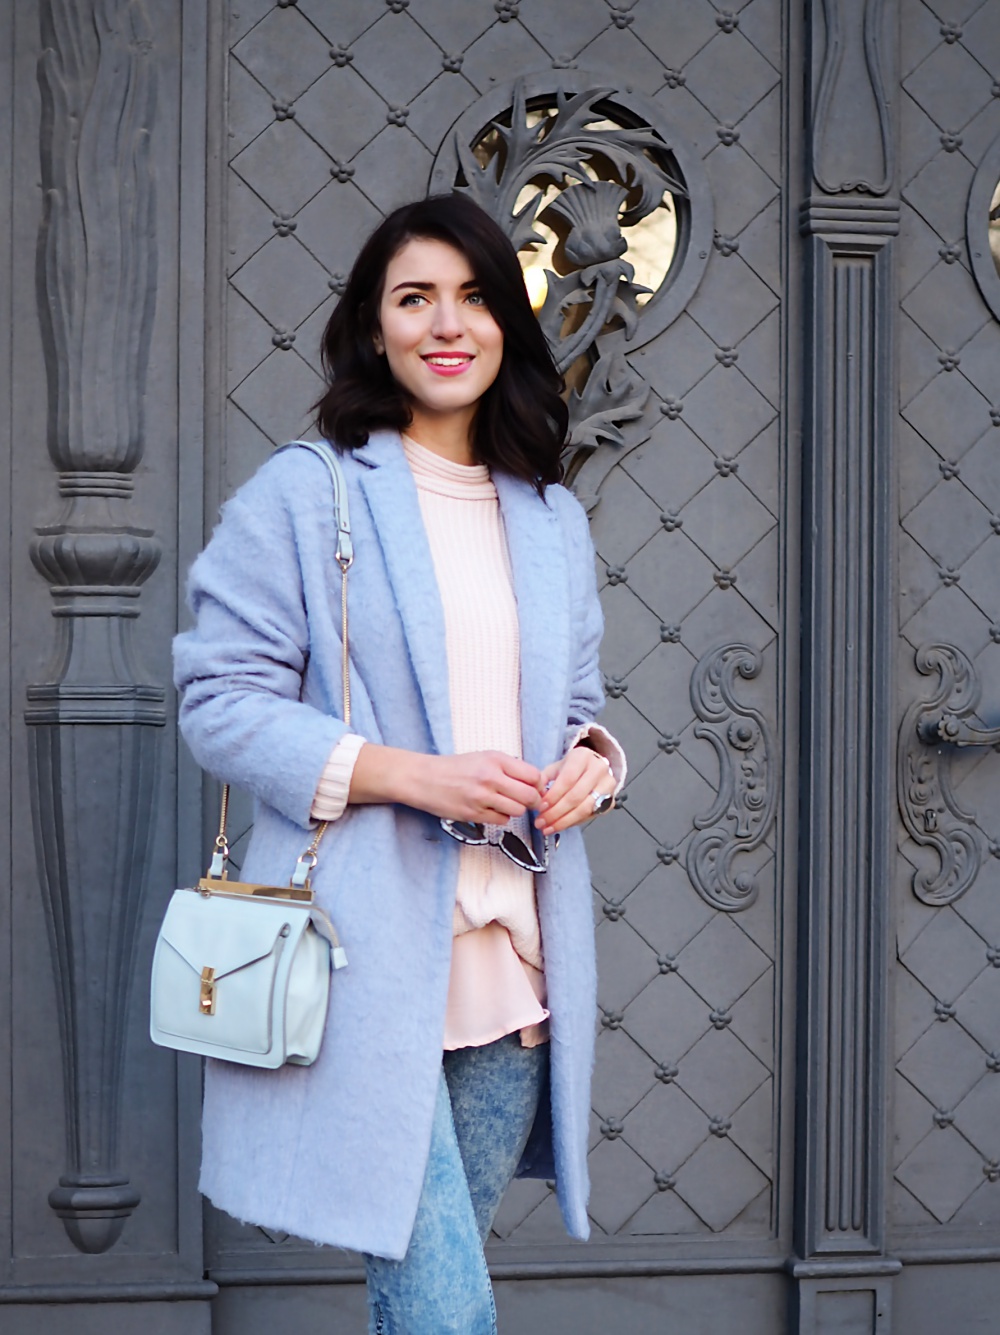 pastels in winter streetstyle berlin samieze blog acid wash jeans skinny oversize coat lilac pale pink baby blue light colors pastel outfit style silver watch gaspard sartre gerry weber turtle neck knitted sweater adidas sneakers superstar